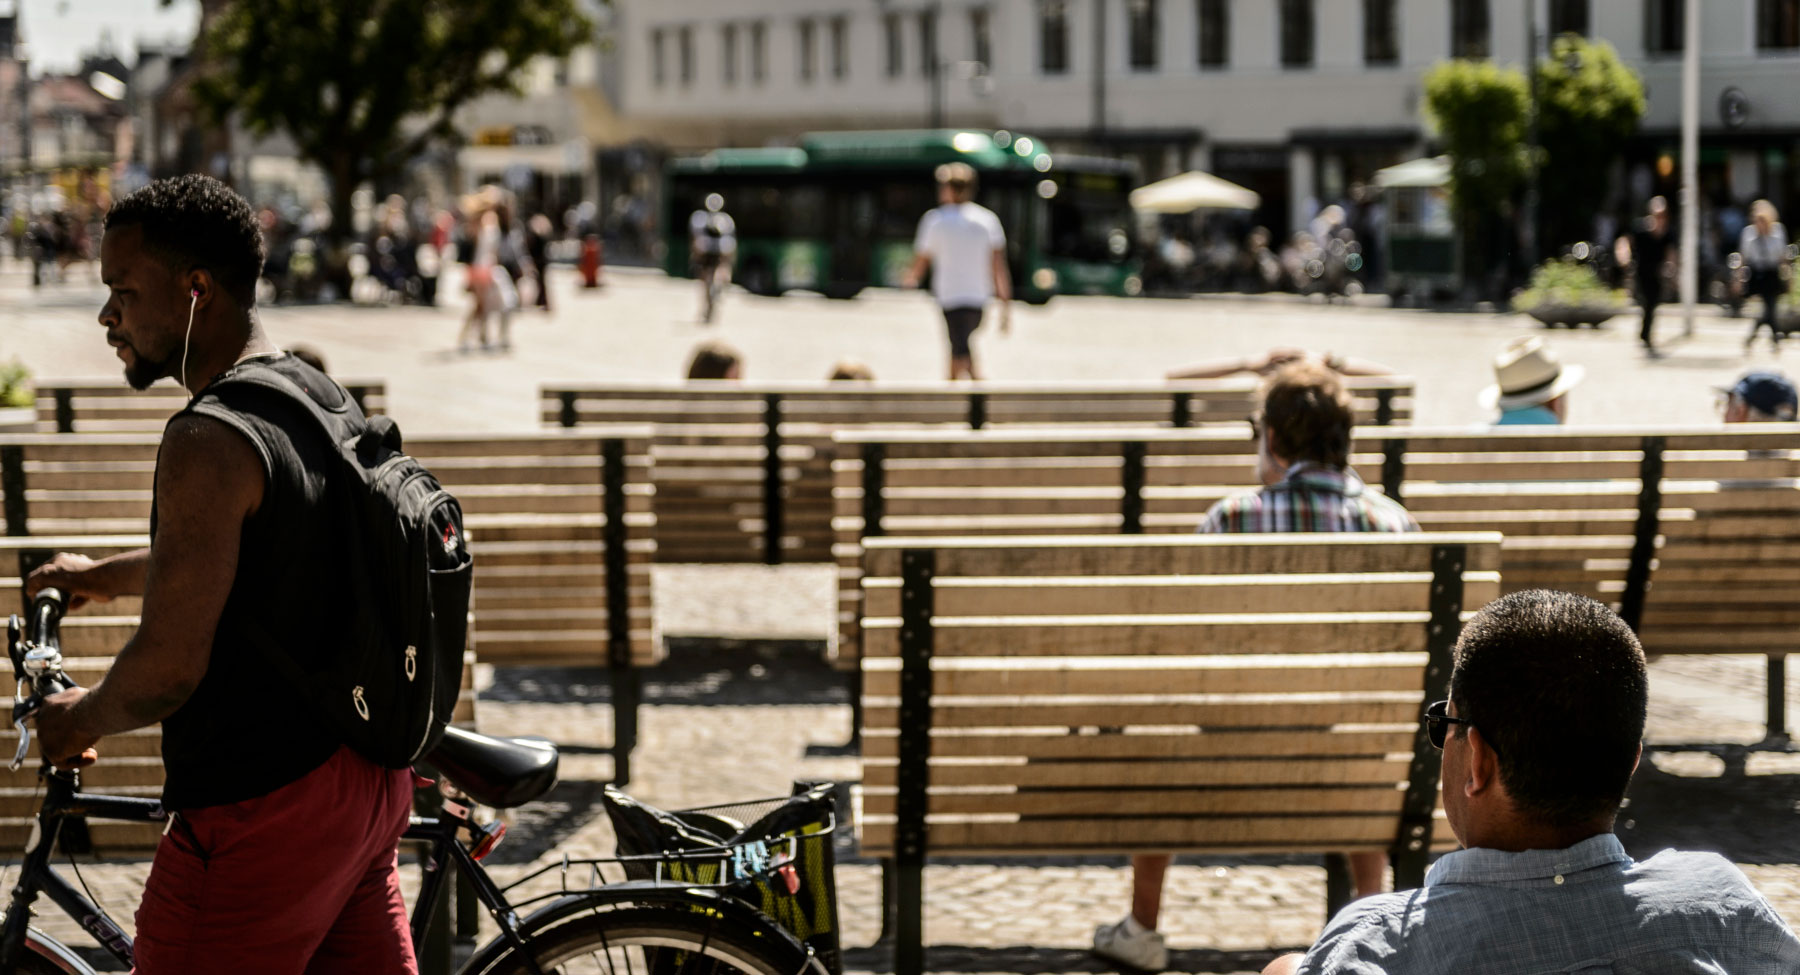 A man walking with his bike across Stortorget in Lund, where people are sitting at benches. Photo.